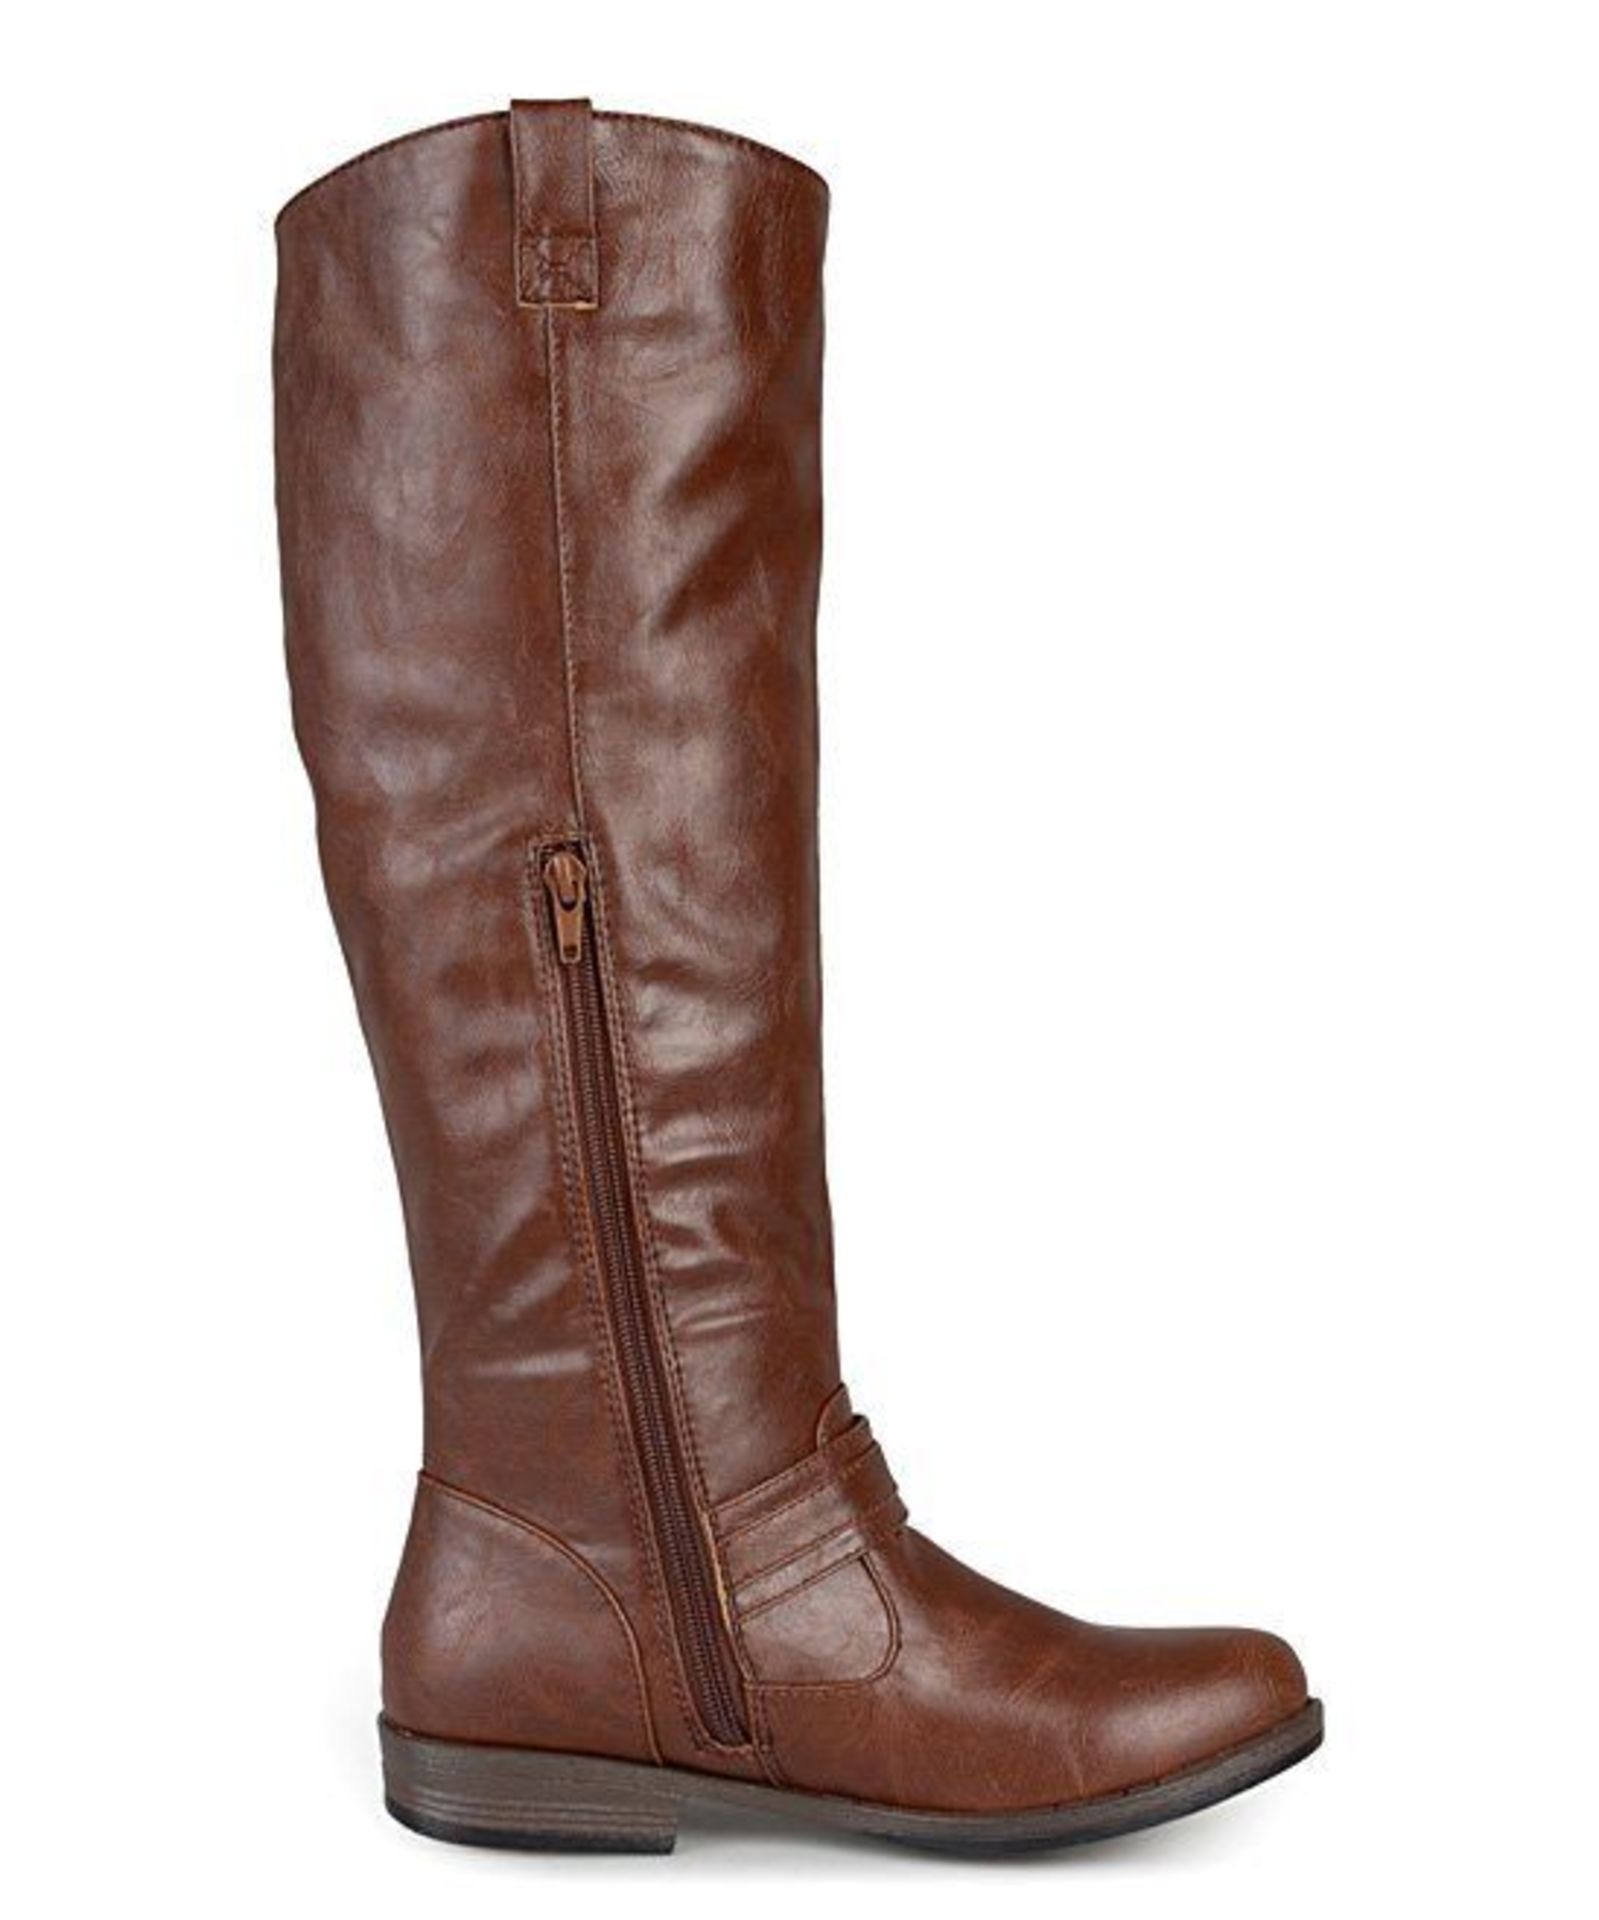 Journee Collection Brown Kai Boot (Uk Size 4.5:Us Size 7) (New with box) [Ref: 14251359-C-002] - Image 3 of 5